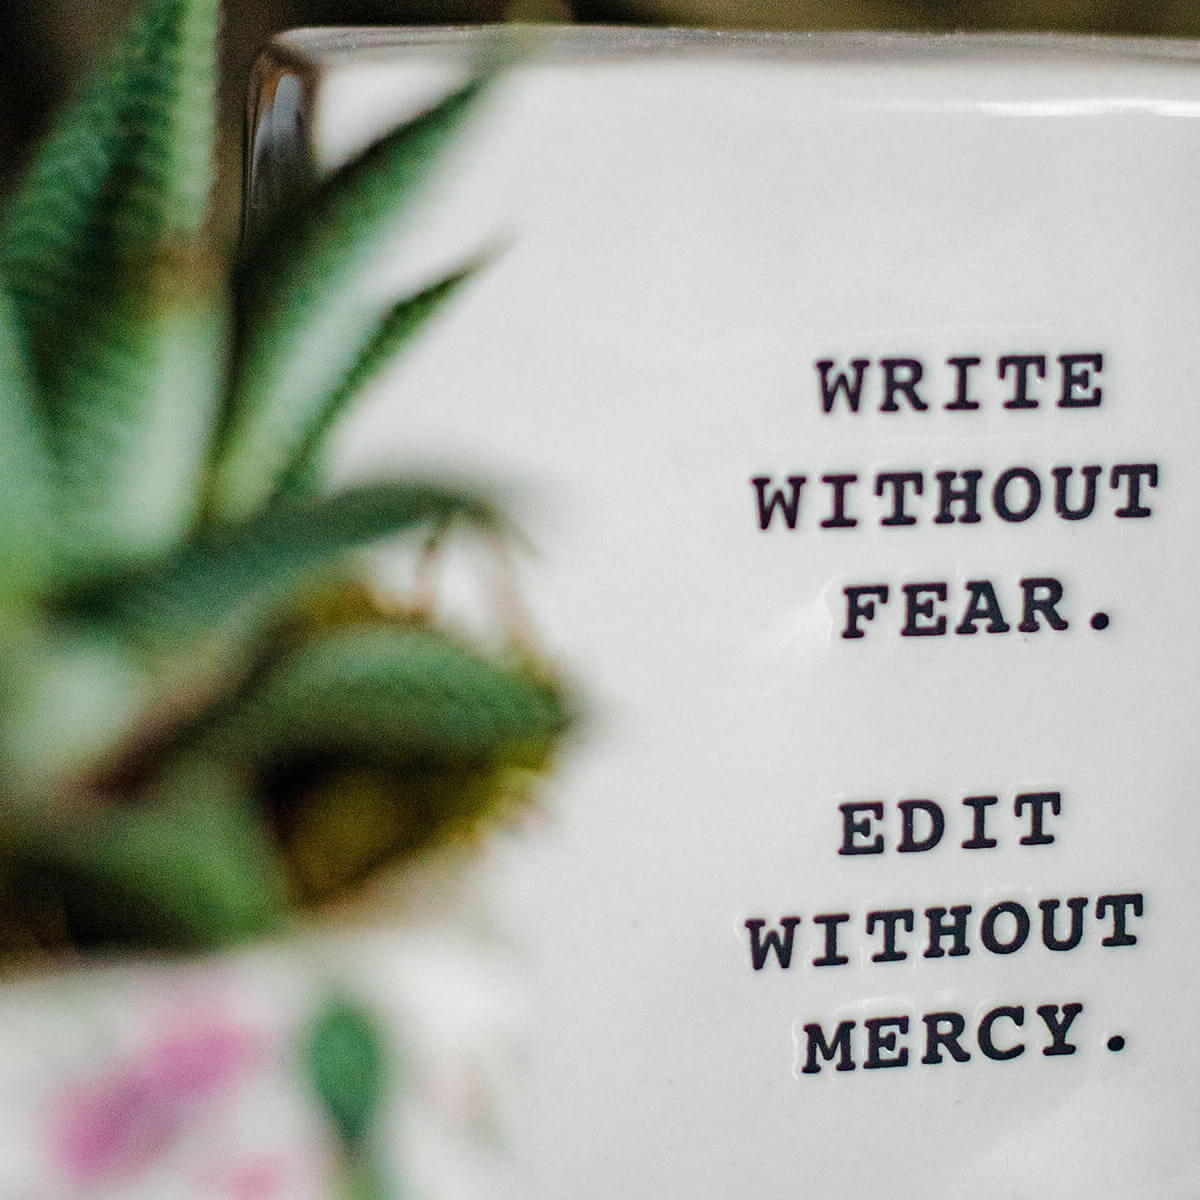 Write without fear.